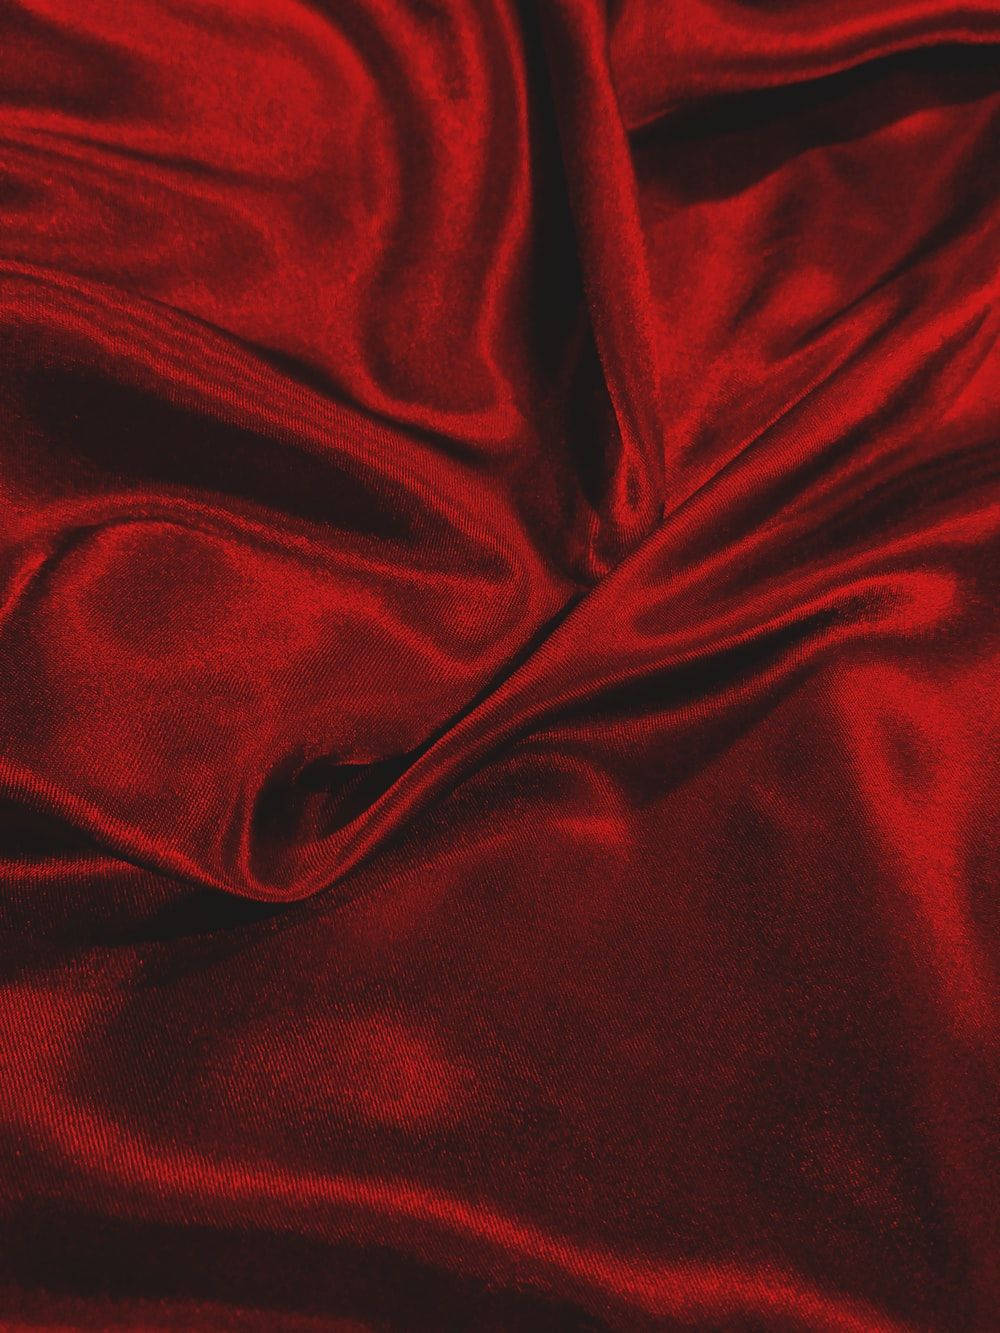 Pure Red Creased Silk